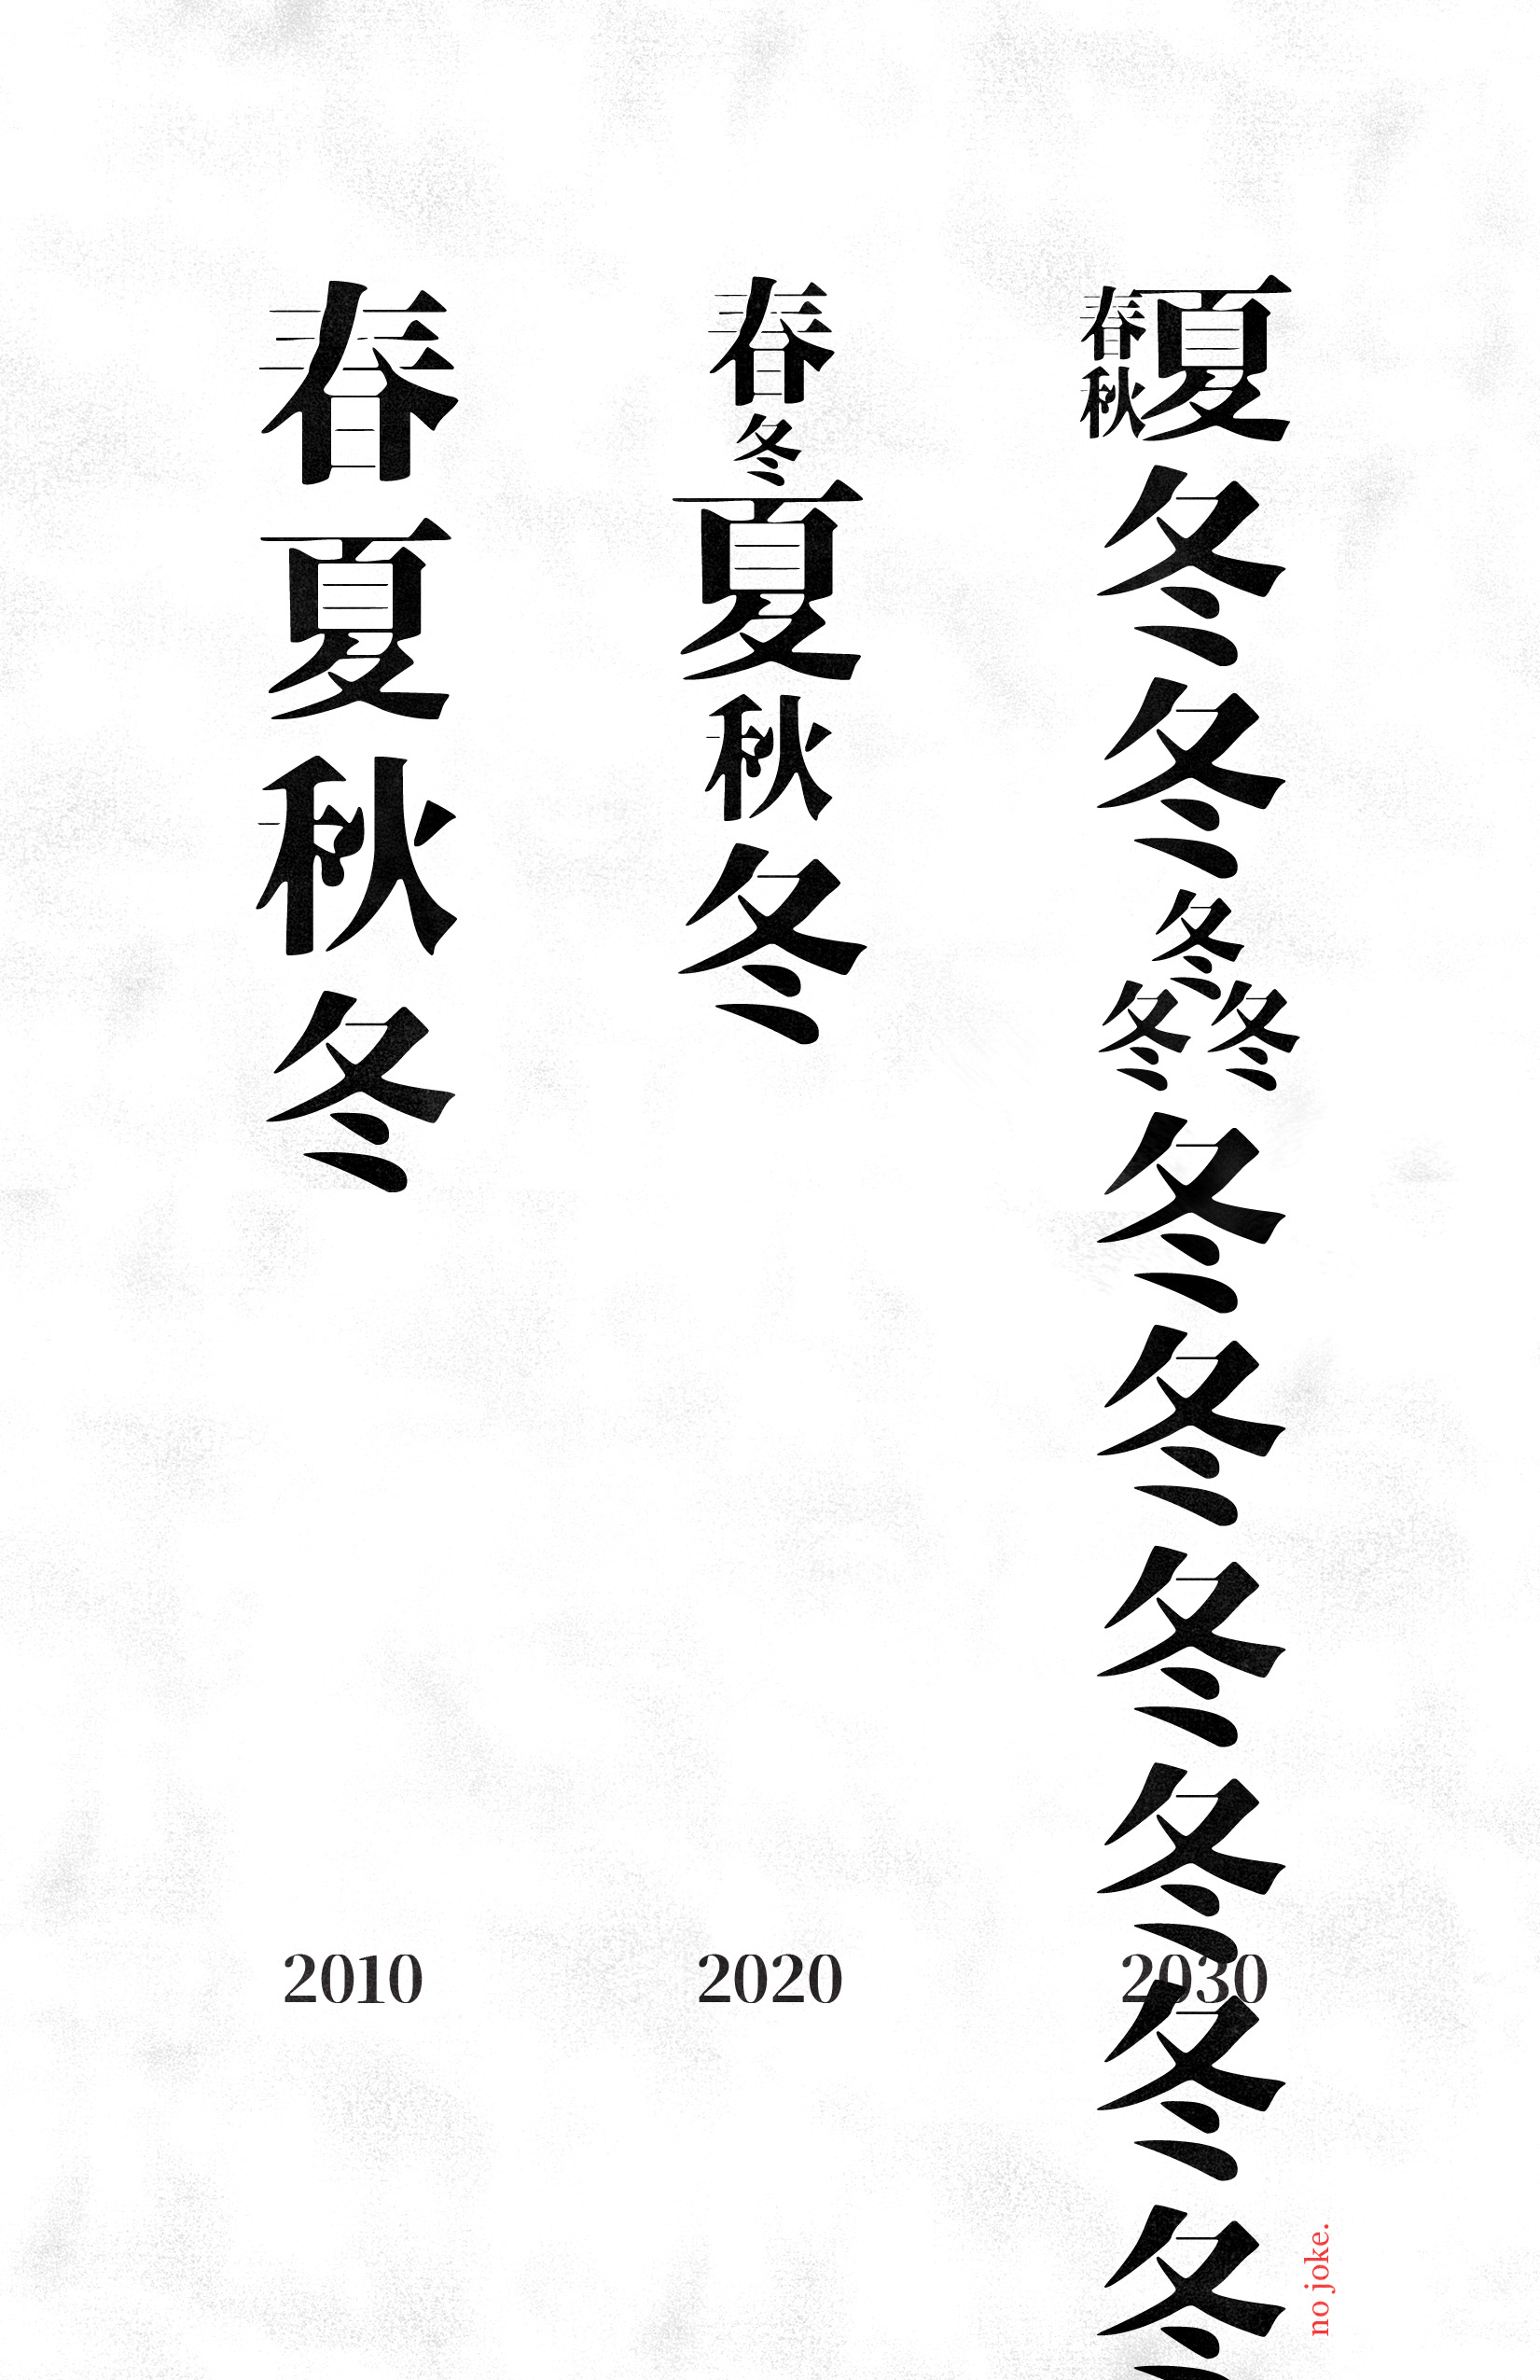 A type-based poster with three columns of black Chinese text on a white background. Each column is labeled 2010, 2020, or 2030.